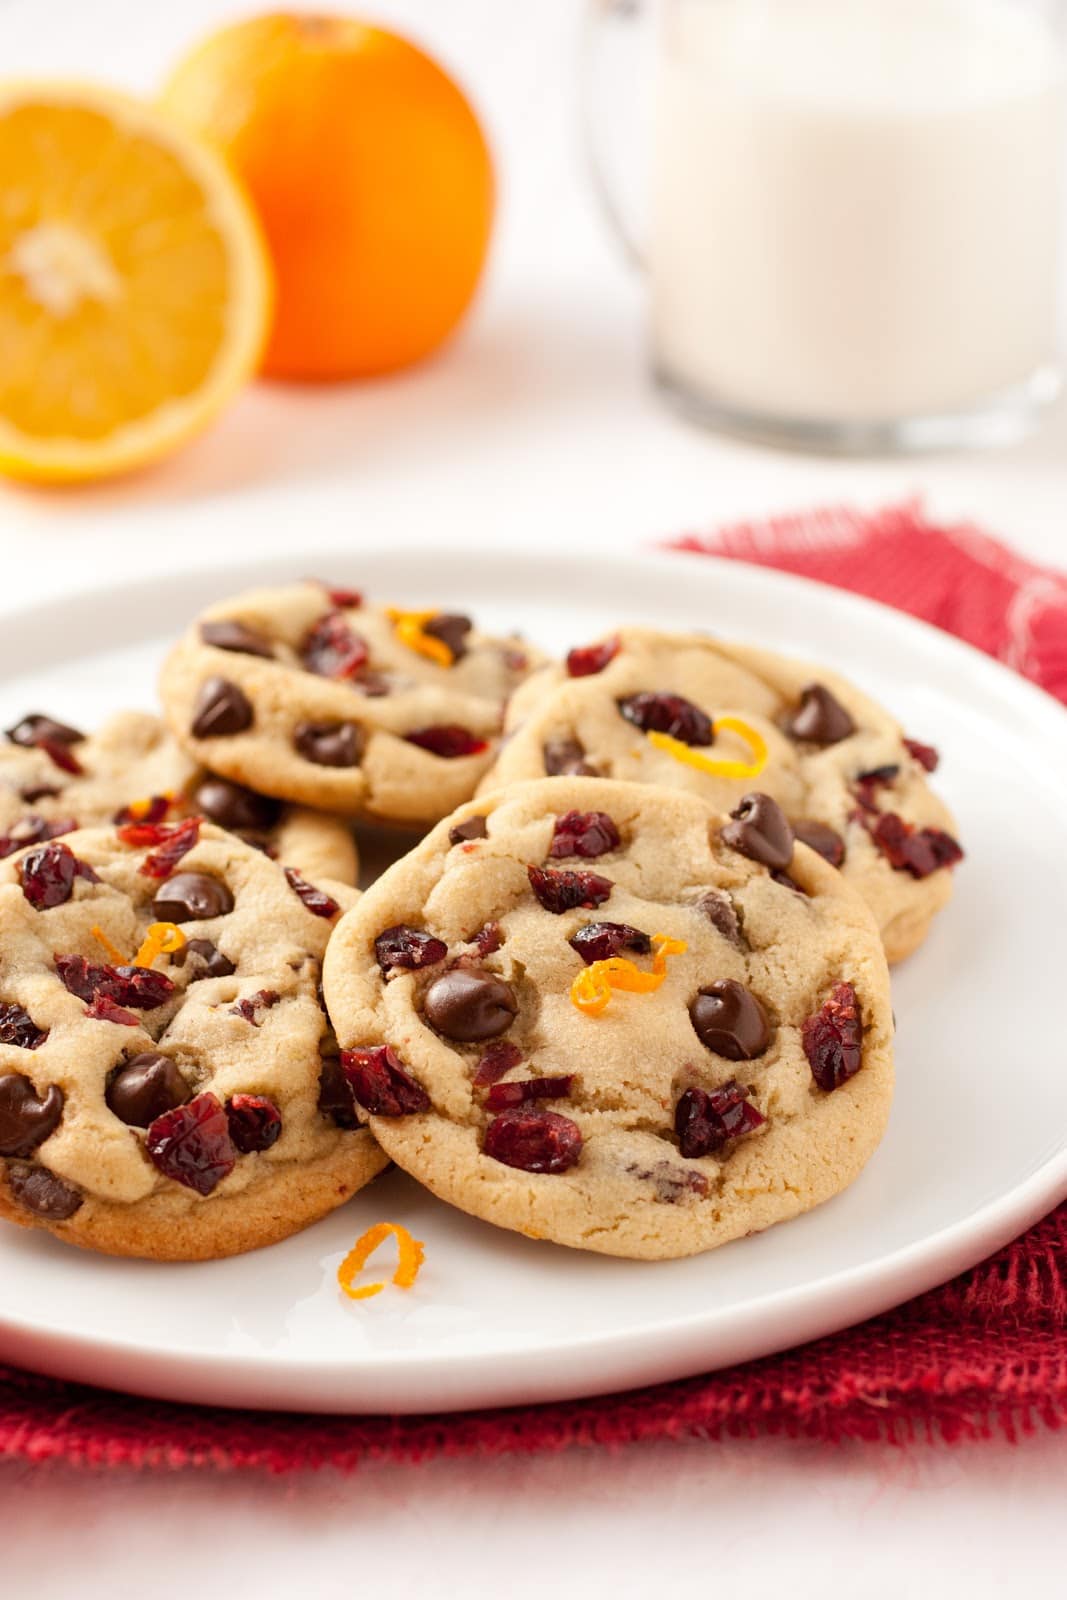 Orange Cranberry Chocolate Chip Cookies - Cooking Classy